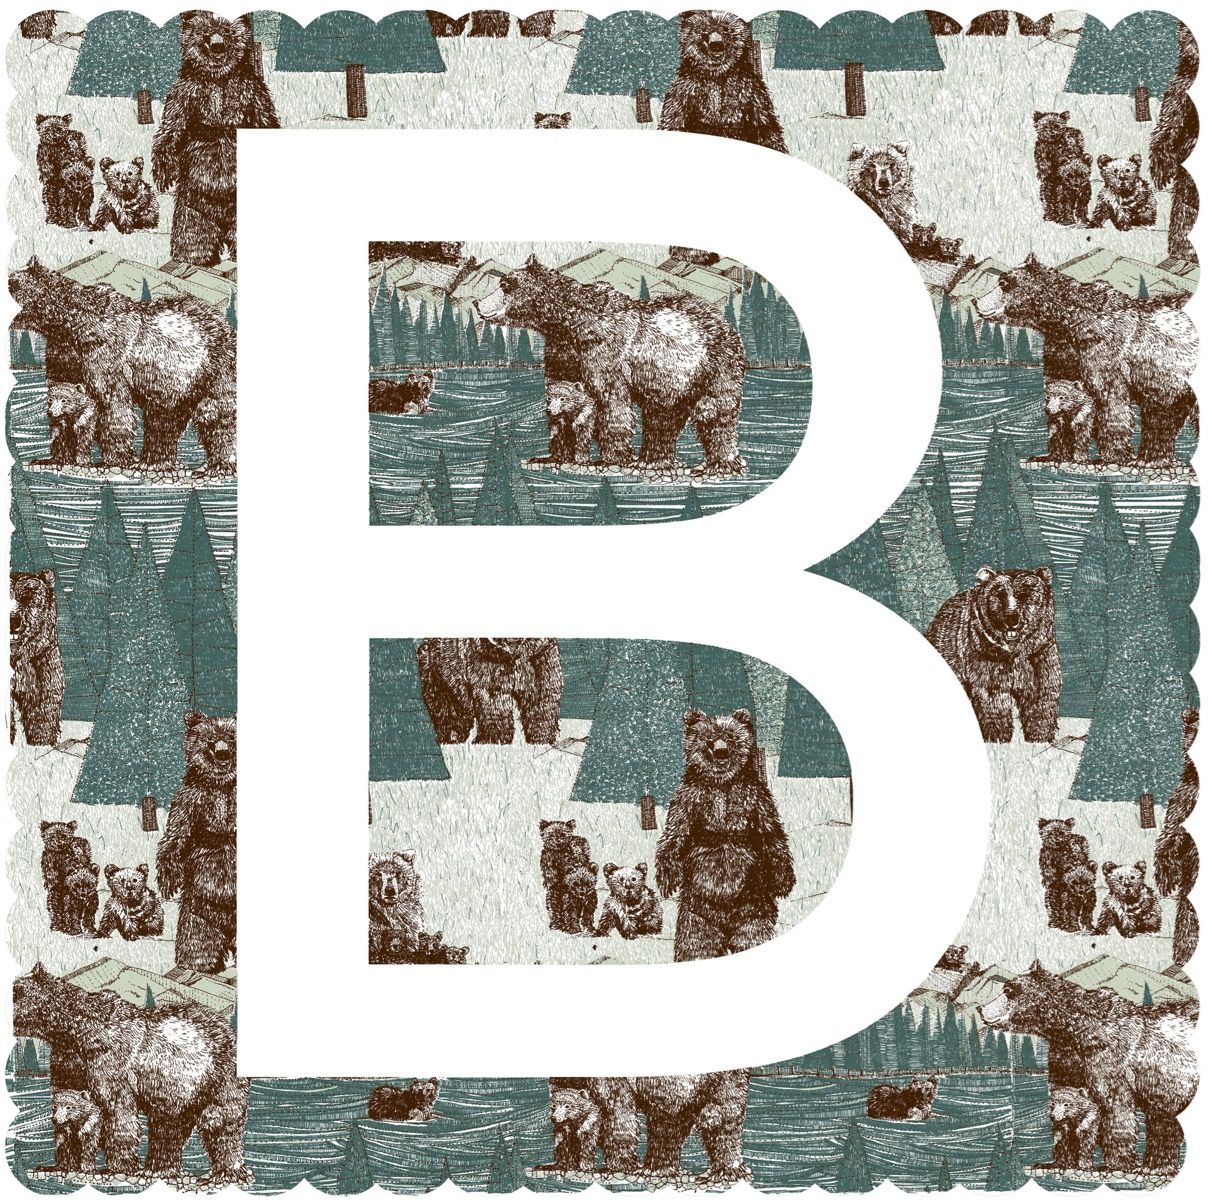 B is for Bear (Large) by Clare Halifax